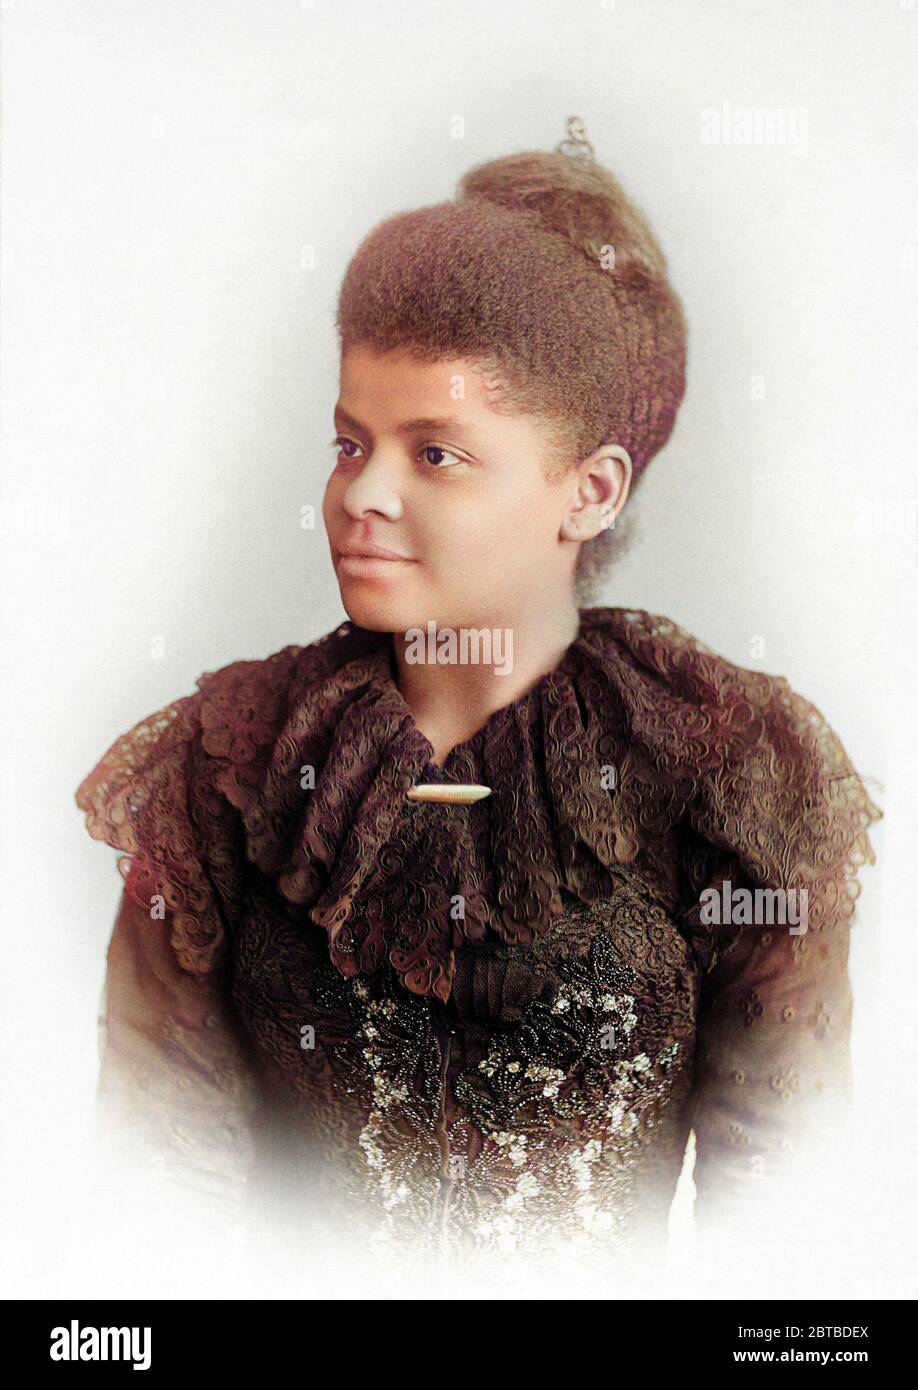 1893 , Chicago, USA : The  IDA B. WELLS ( Bell Wells-Barnett  , 1861 - 1931 ). American investigative journalist , educator and early leader in the civil rights movement . She was one of the founders of the National Association for the Advancement of Colored People ( NAACP ).Wells arguably became the most famous black woman in America, during a life that was centered on combating prejudice and violence, who fought for equality for African Americans , especially women . Photo by Miss Garrity , Chicago. DIGITALLY COLORIZED . - Wells Barnett - Movimento diritti civili - Gente di Colore - AFRO-AME Stock Photo